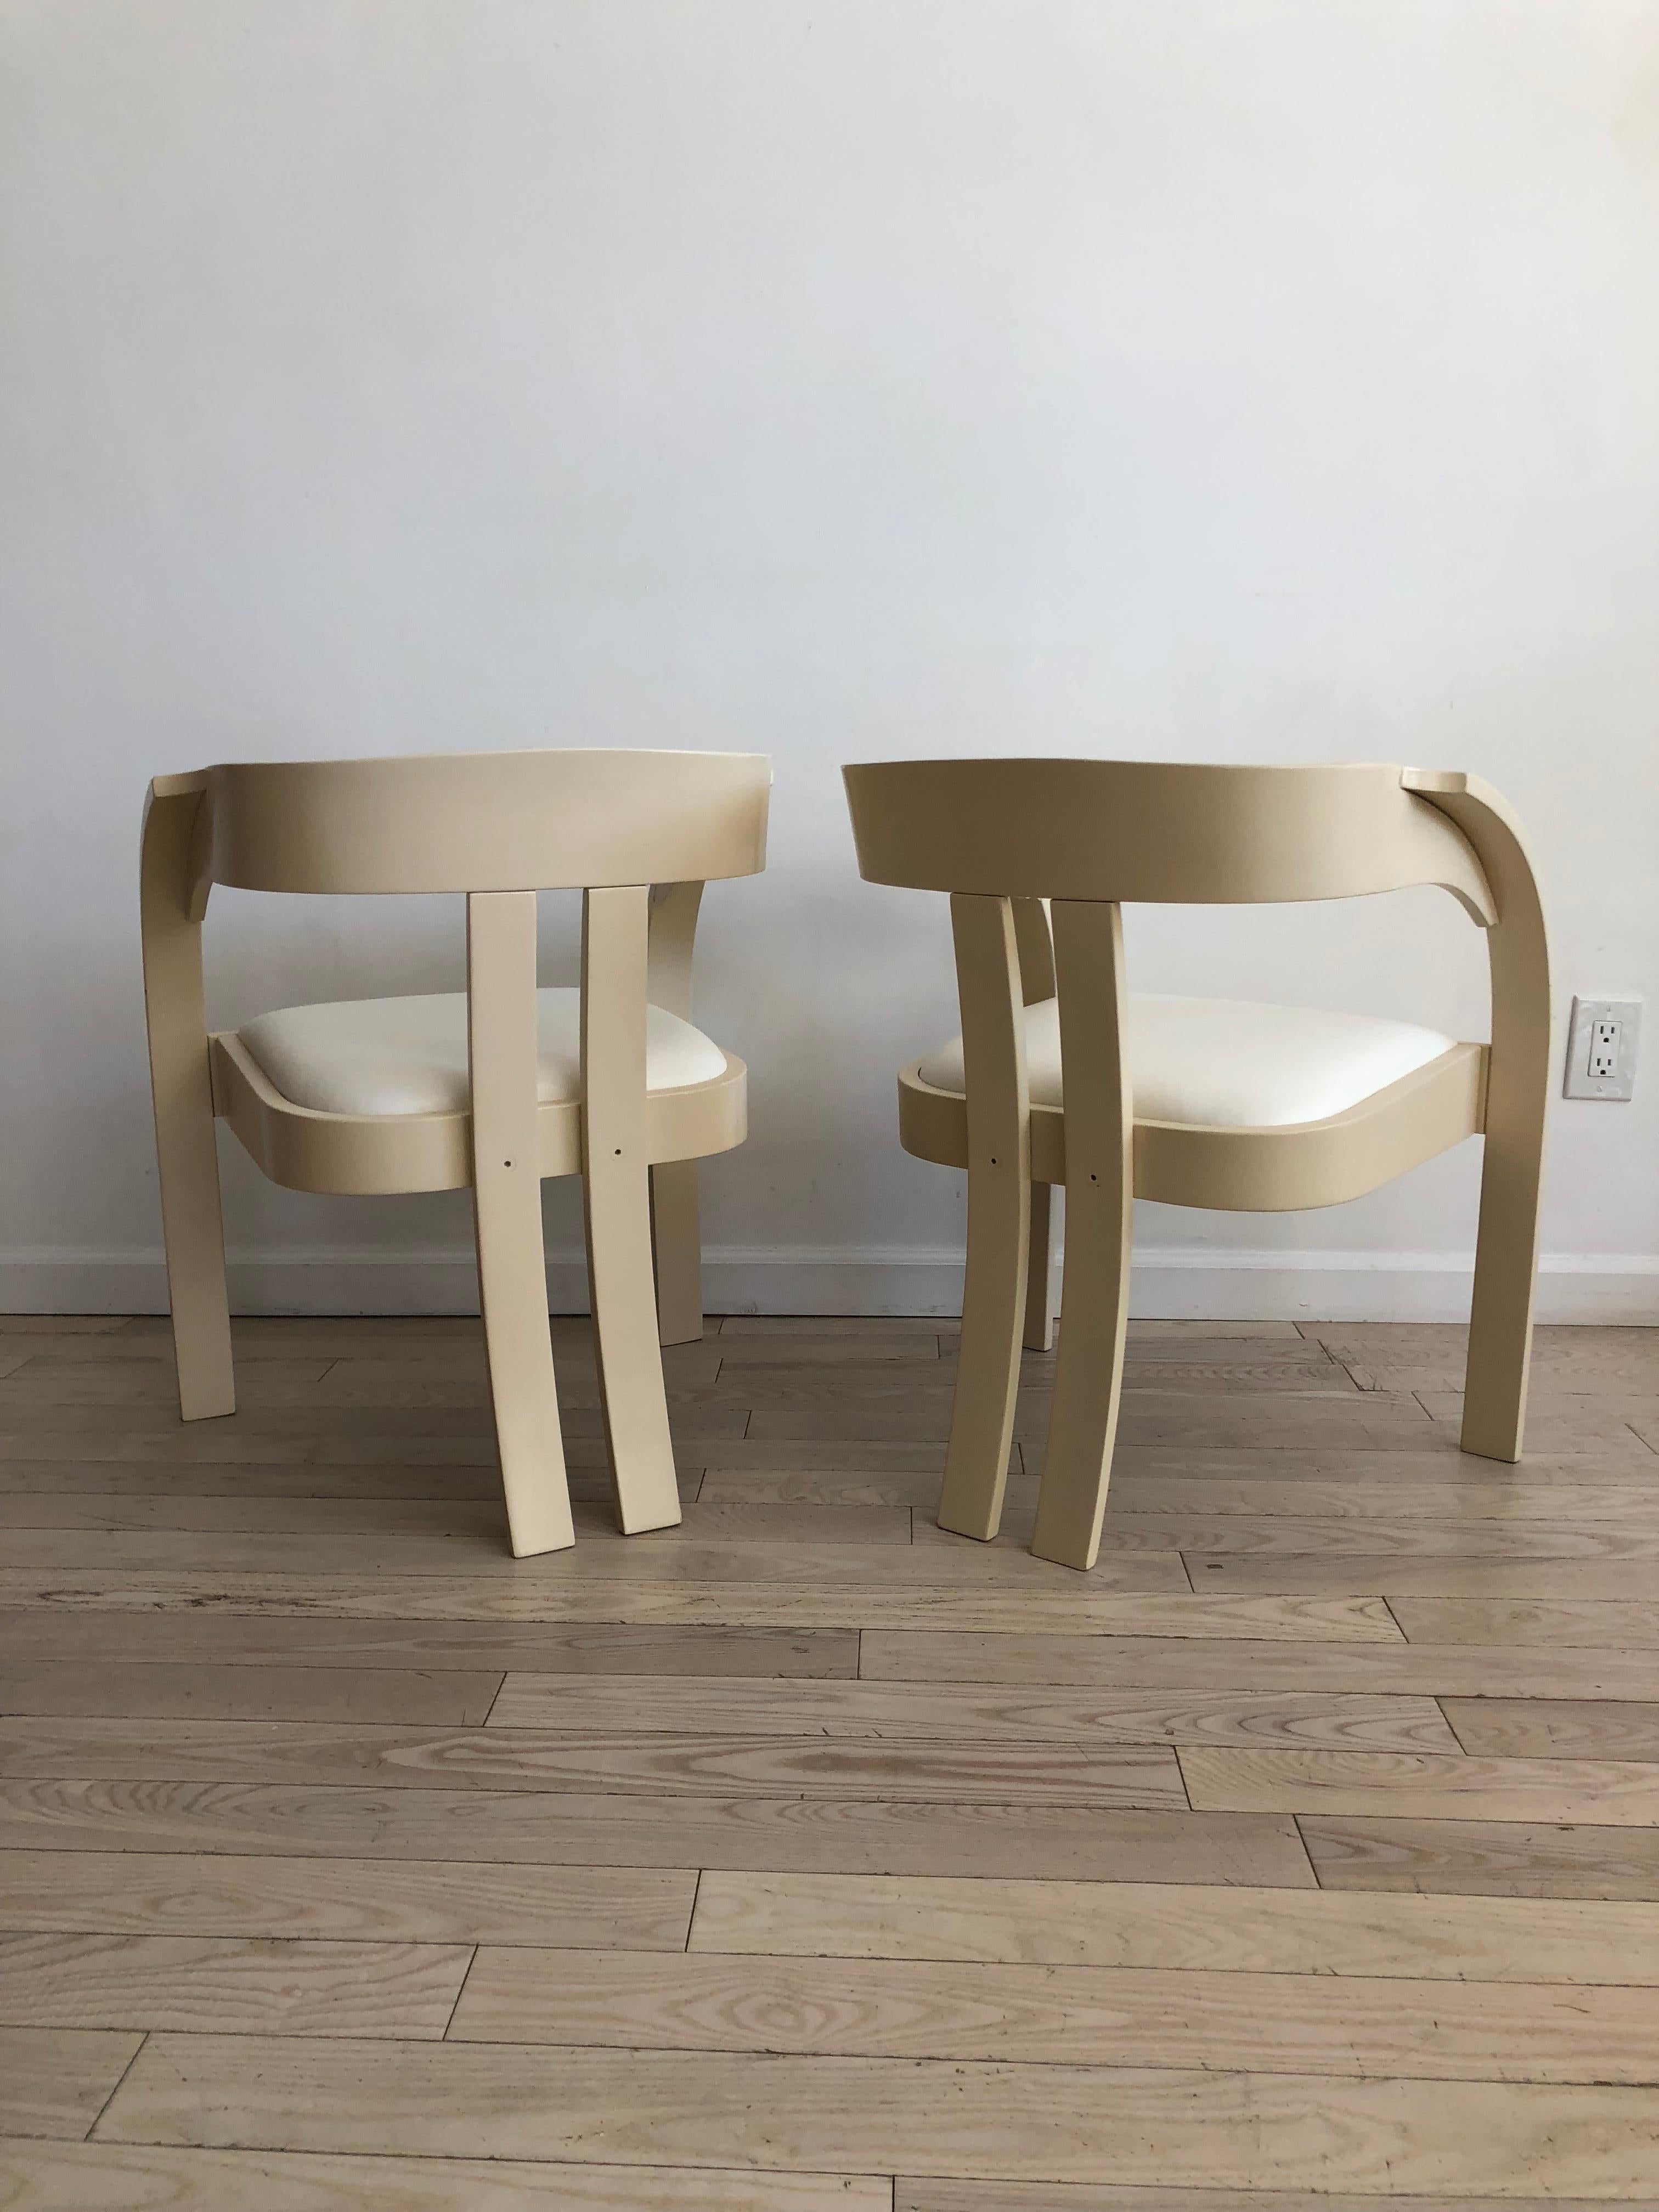 Mid-Century Modern Elisa Chairs by Giovanni Bassi for Poltronova, Pair of Cream and White Chairs